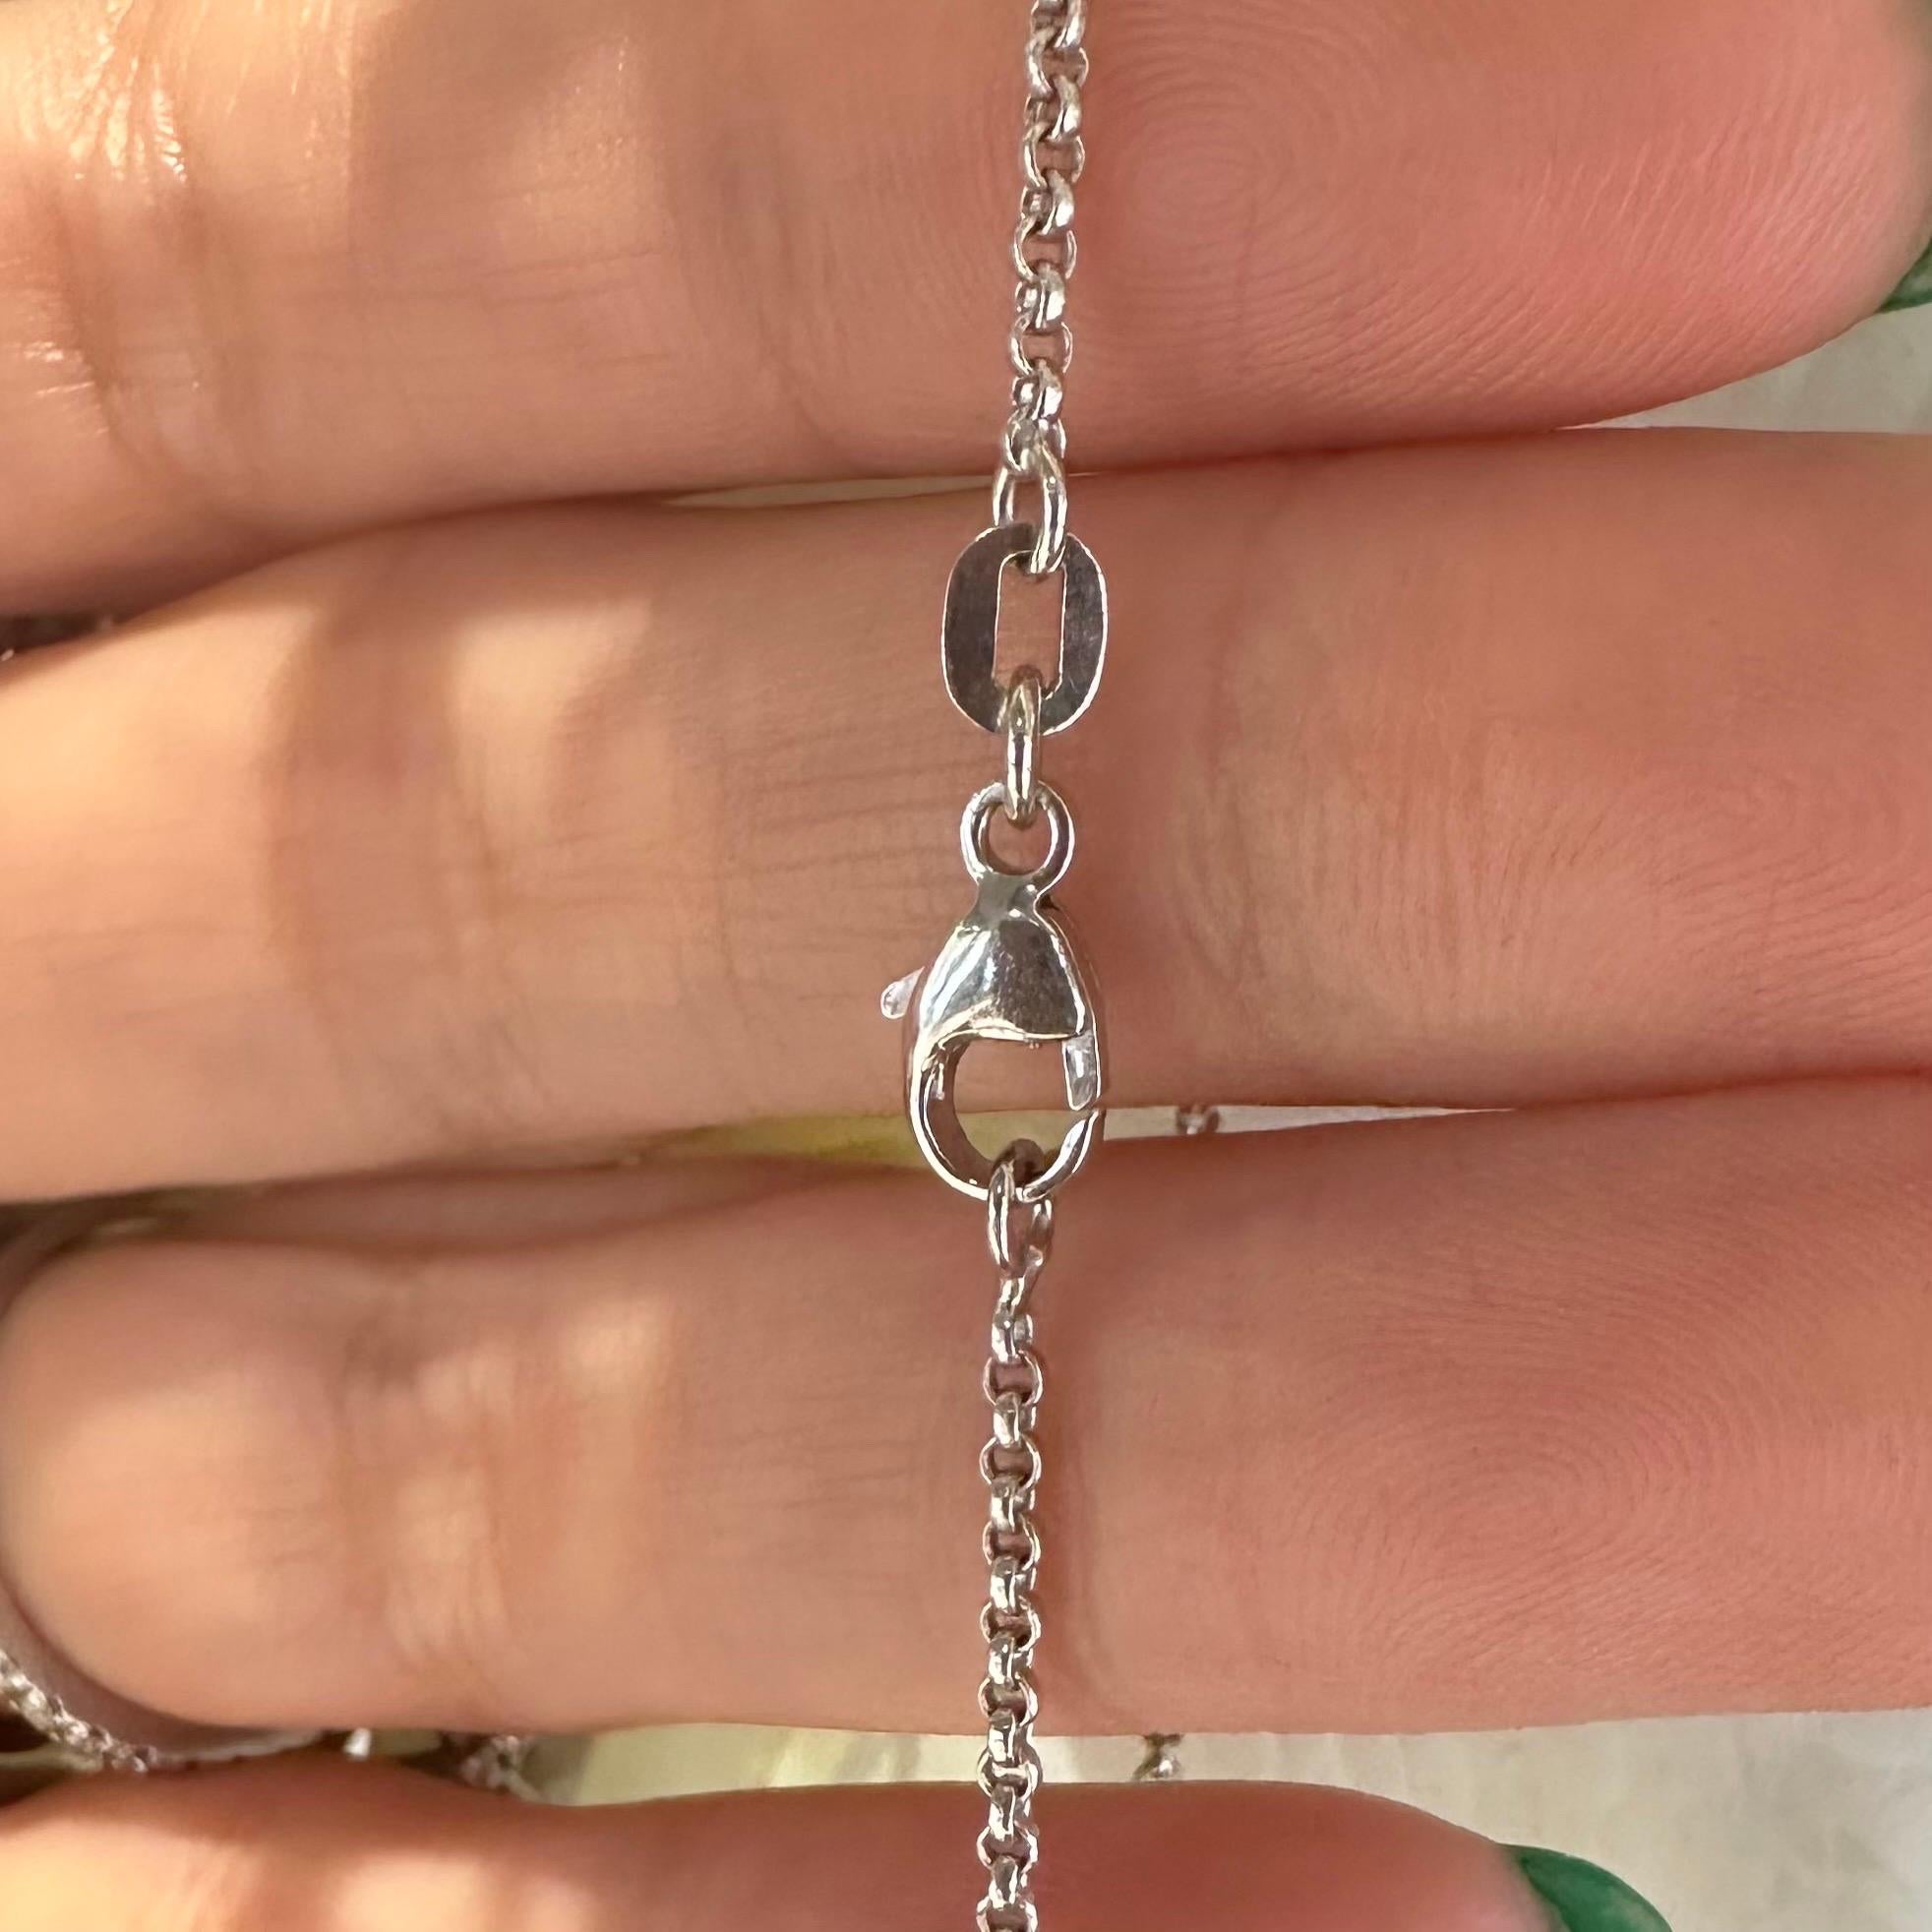 Bezel Set Solitaire Round Diamond Necklace 1 Carat In Excellent Condition For Sale In Miami, FL